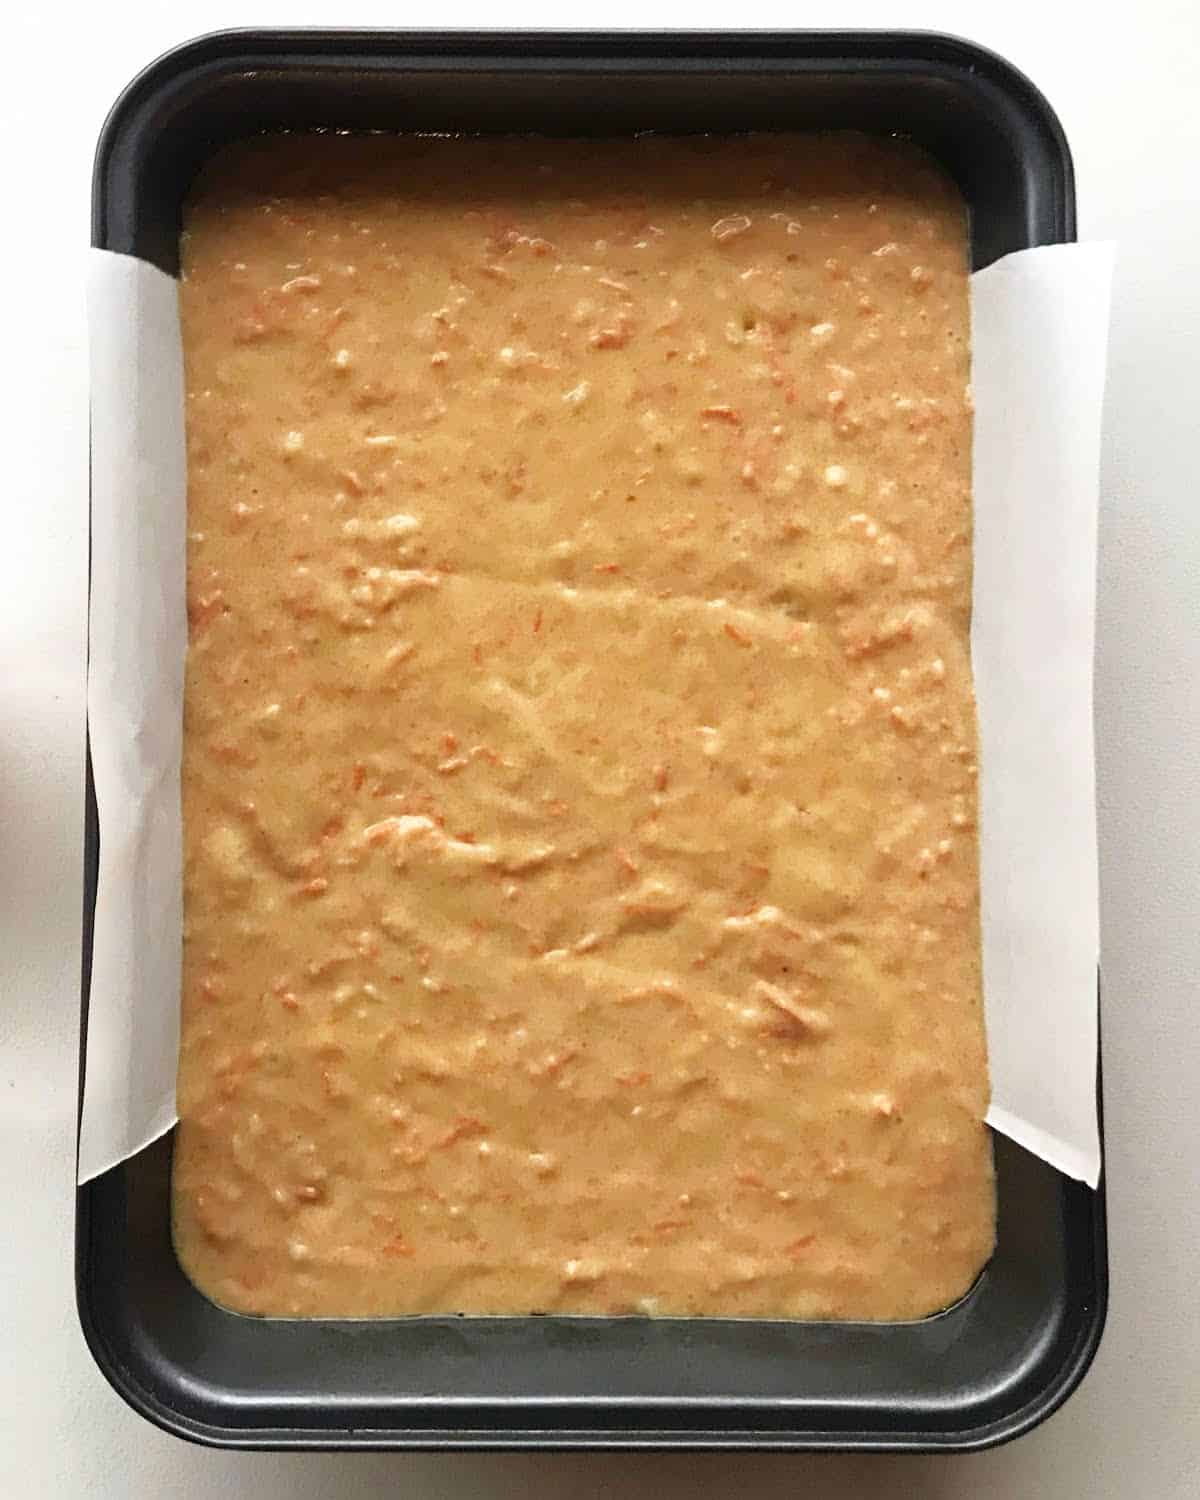 Carrot cake batter in a dark metal rectangular cake pan with parchment paper. White surface.